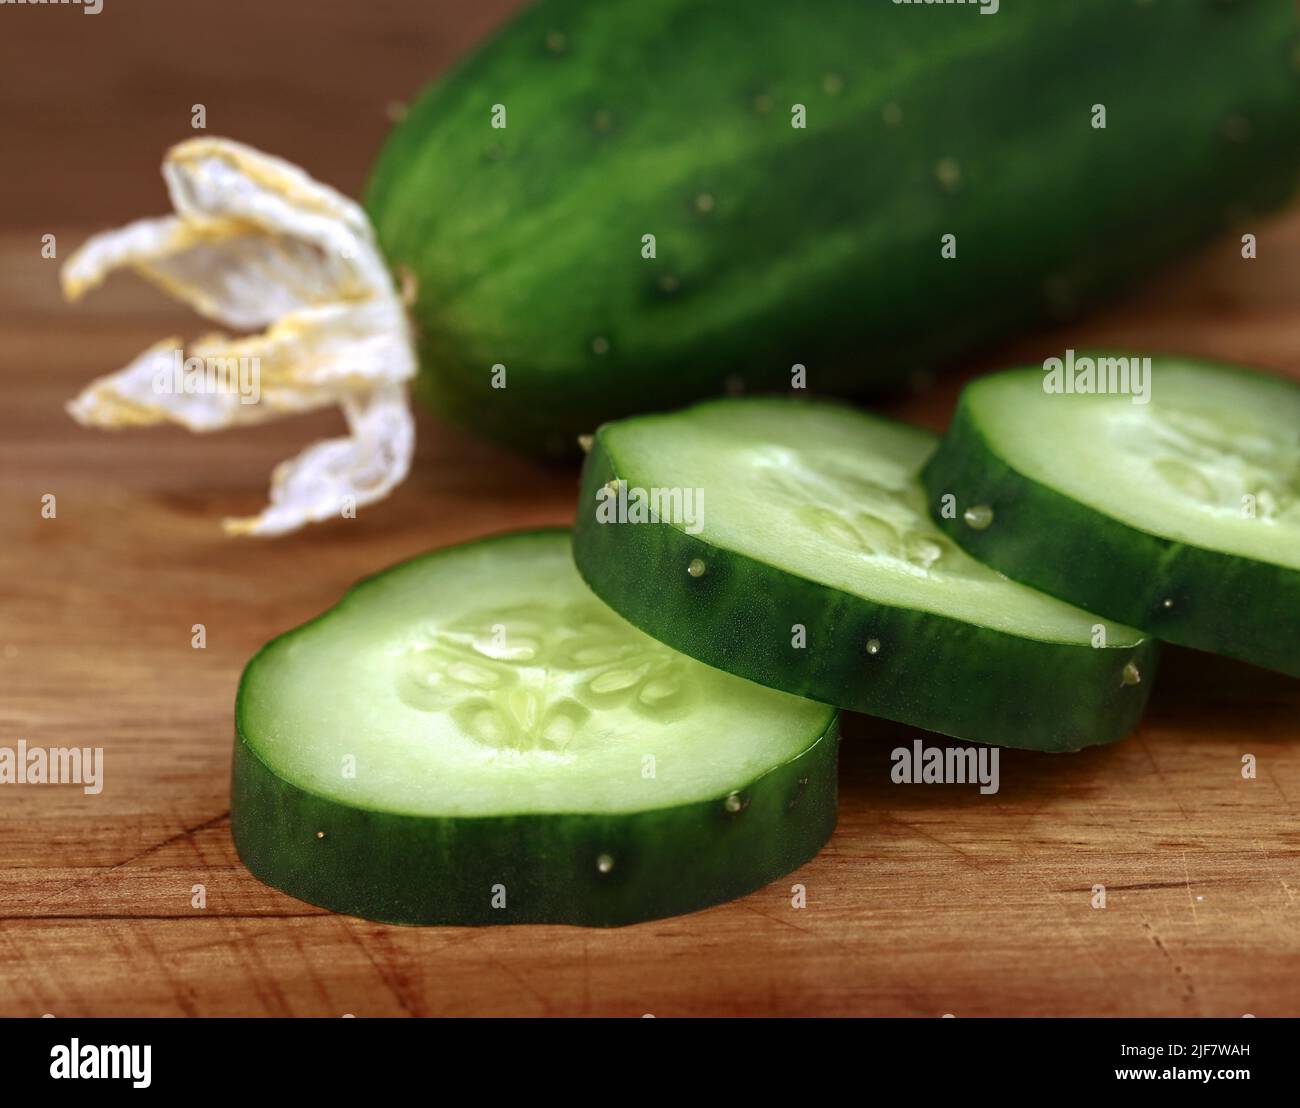 Close-up of cut cucumber slices of an outdoor cucumber with dried fruit blossom, freshly harvested home-grown vegetables Stock Photo